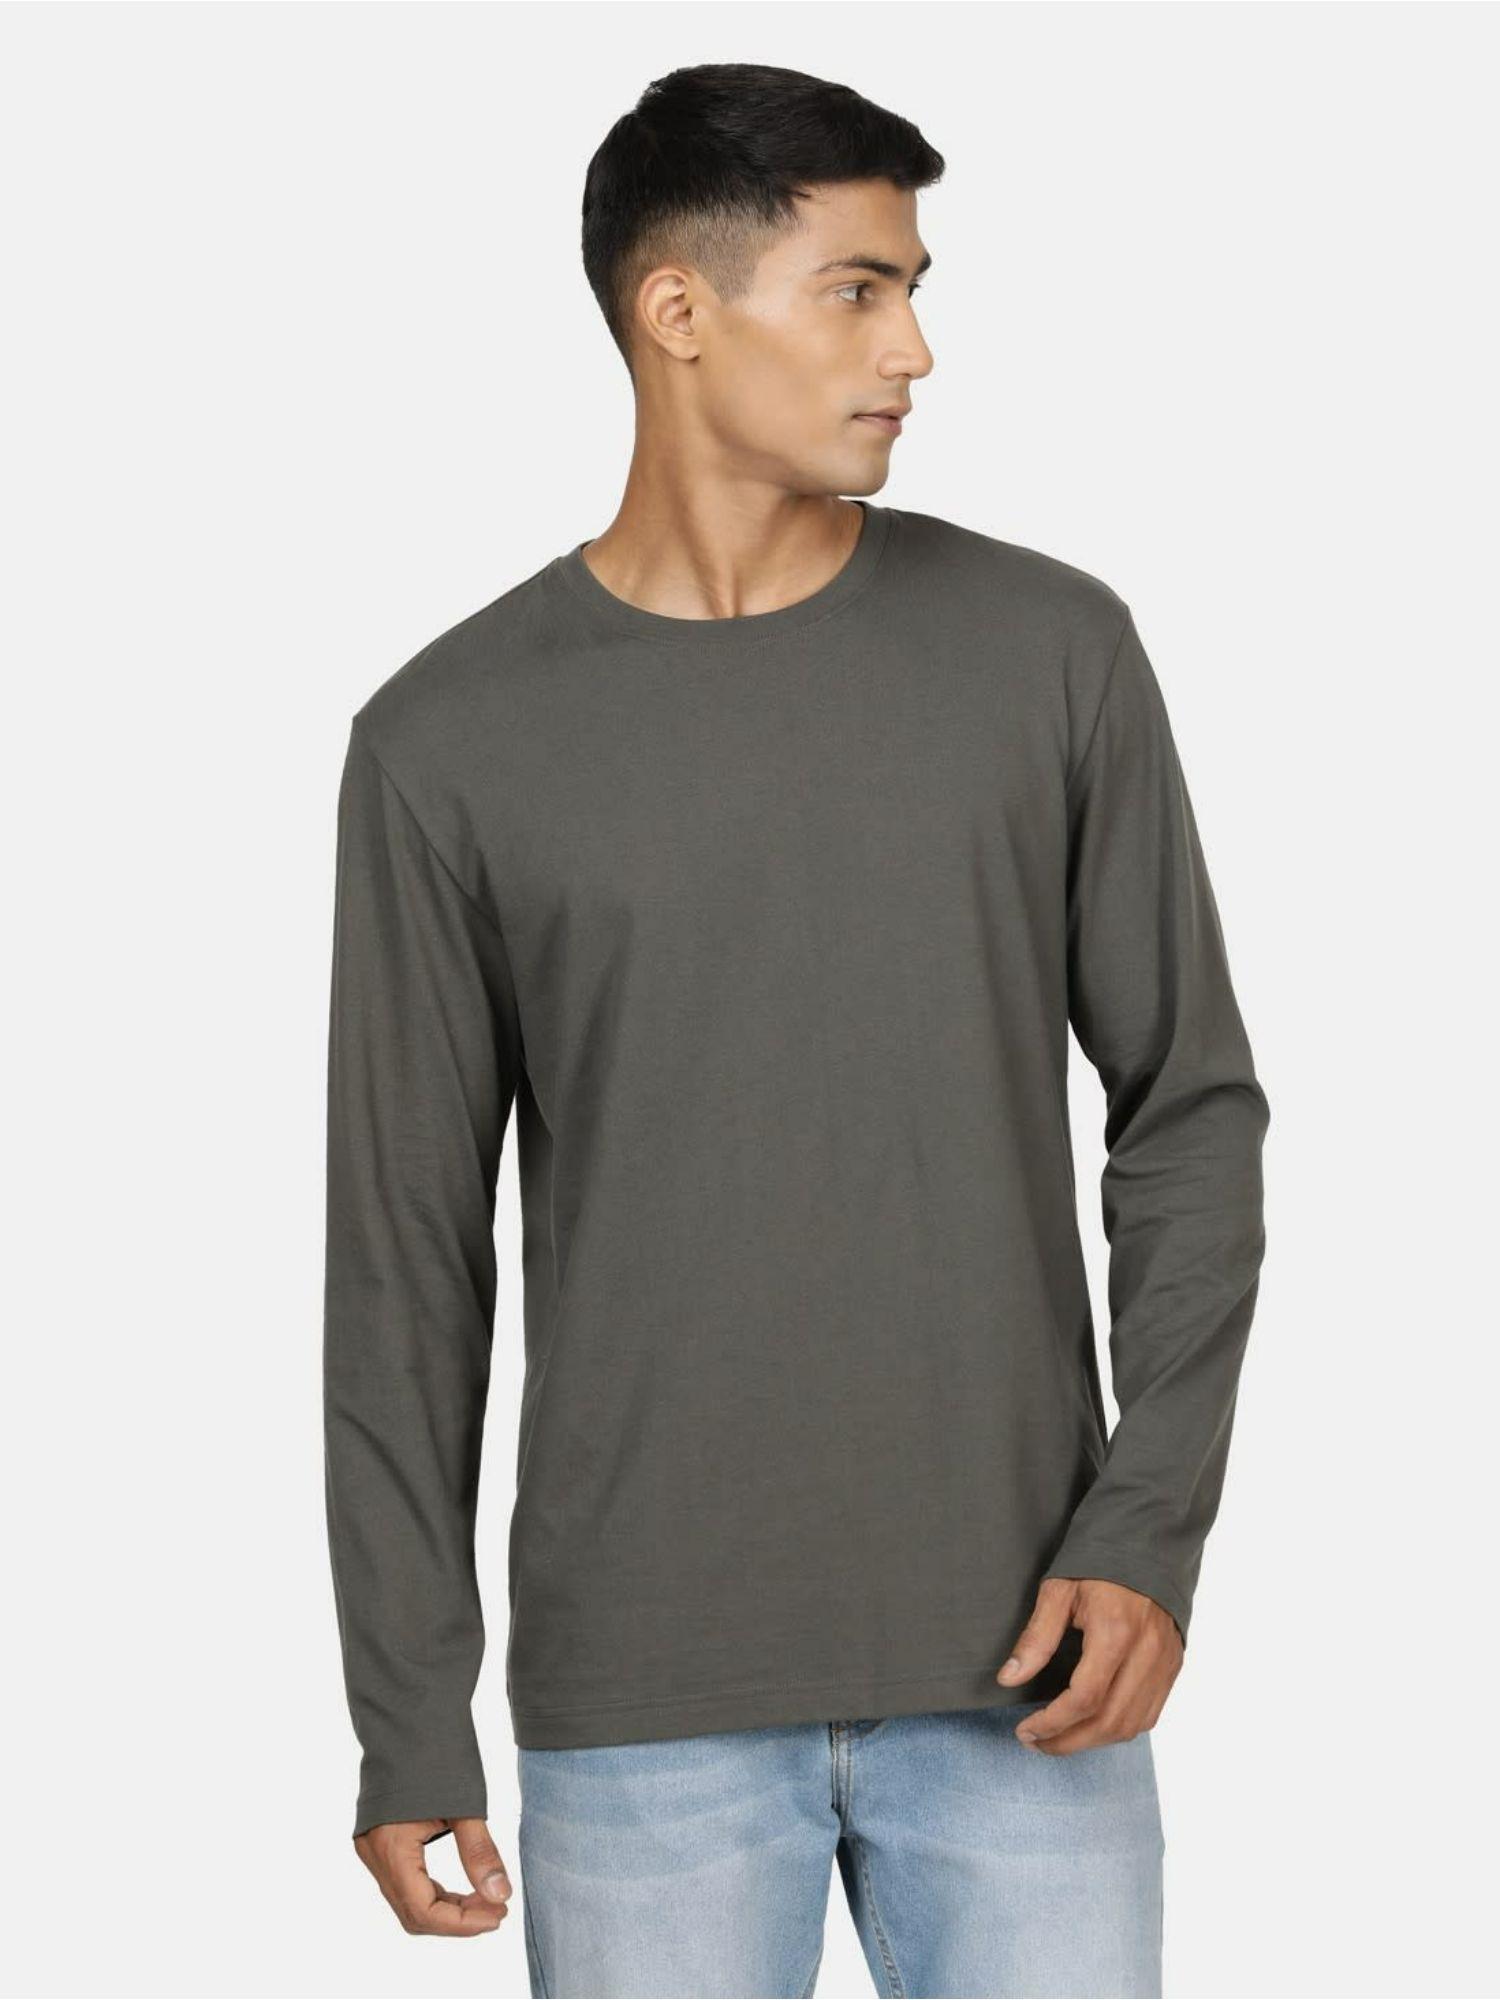 am95 mens super combed cotton rich solid round neck full sleeve t-shirt black olive